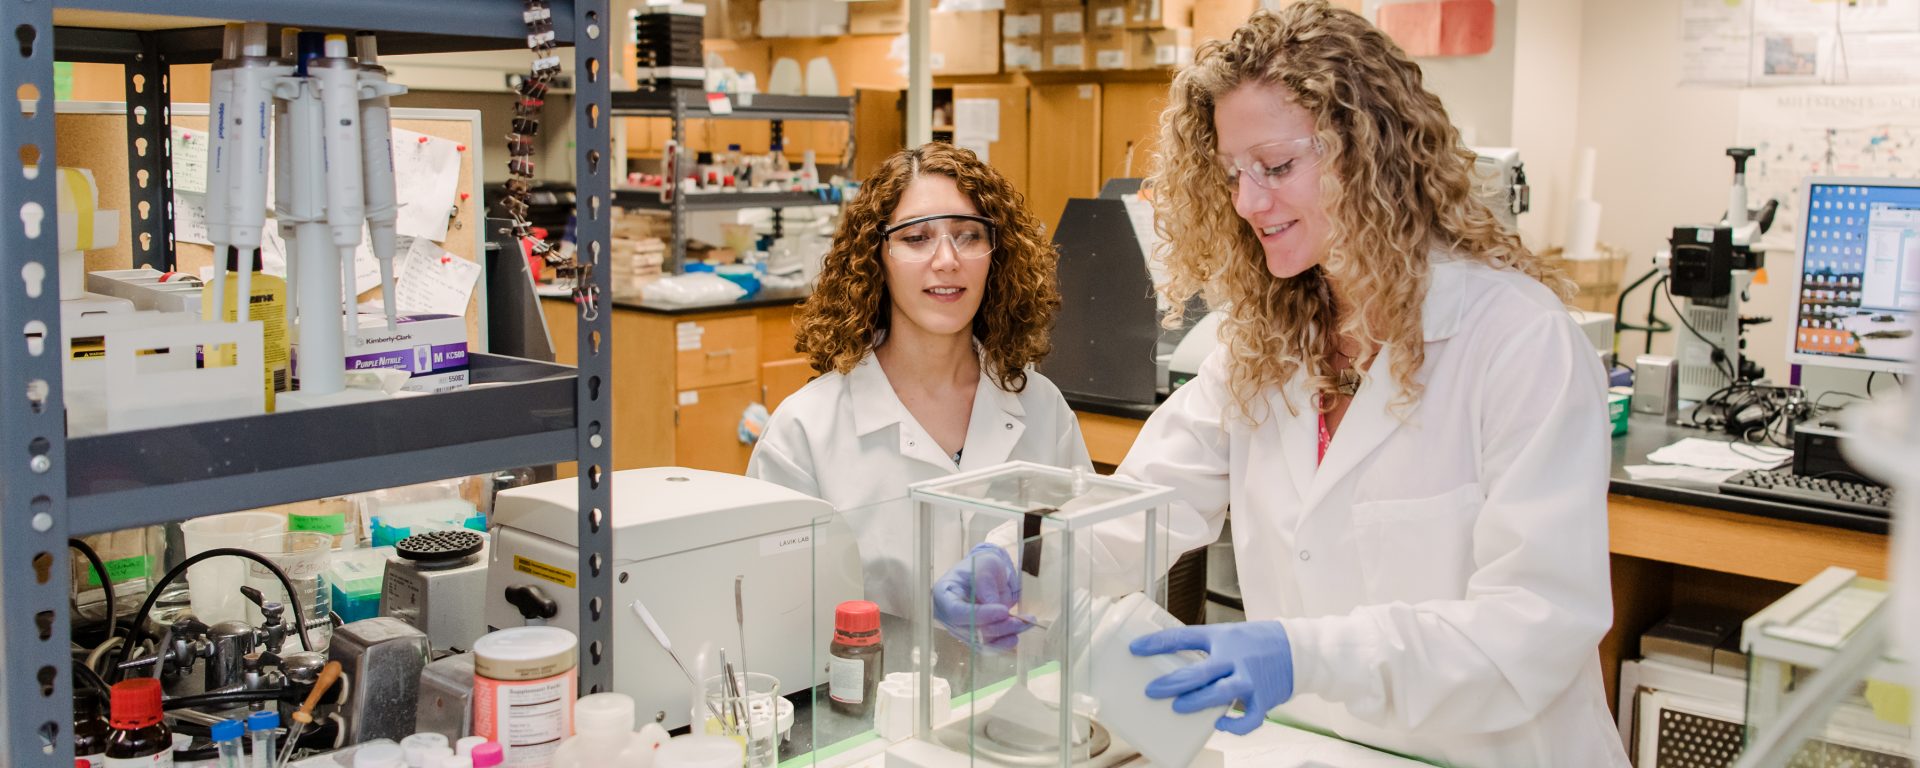 Zahra Ghassemi & Laura Simpson, CENG PhD '19, working in the lab. Photo courtesy of Marlayna Demond ’11 for UMBC.